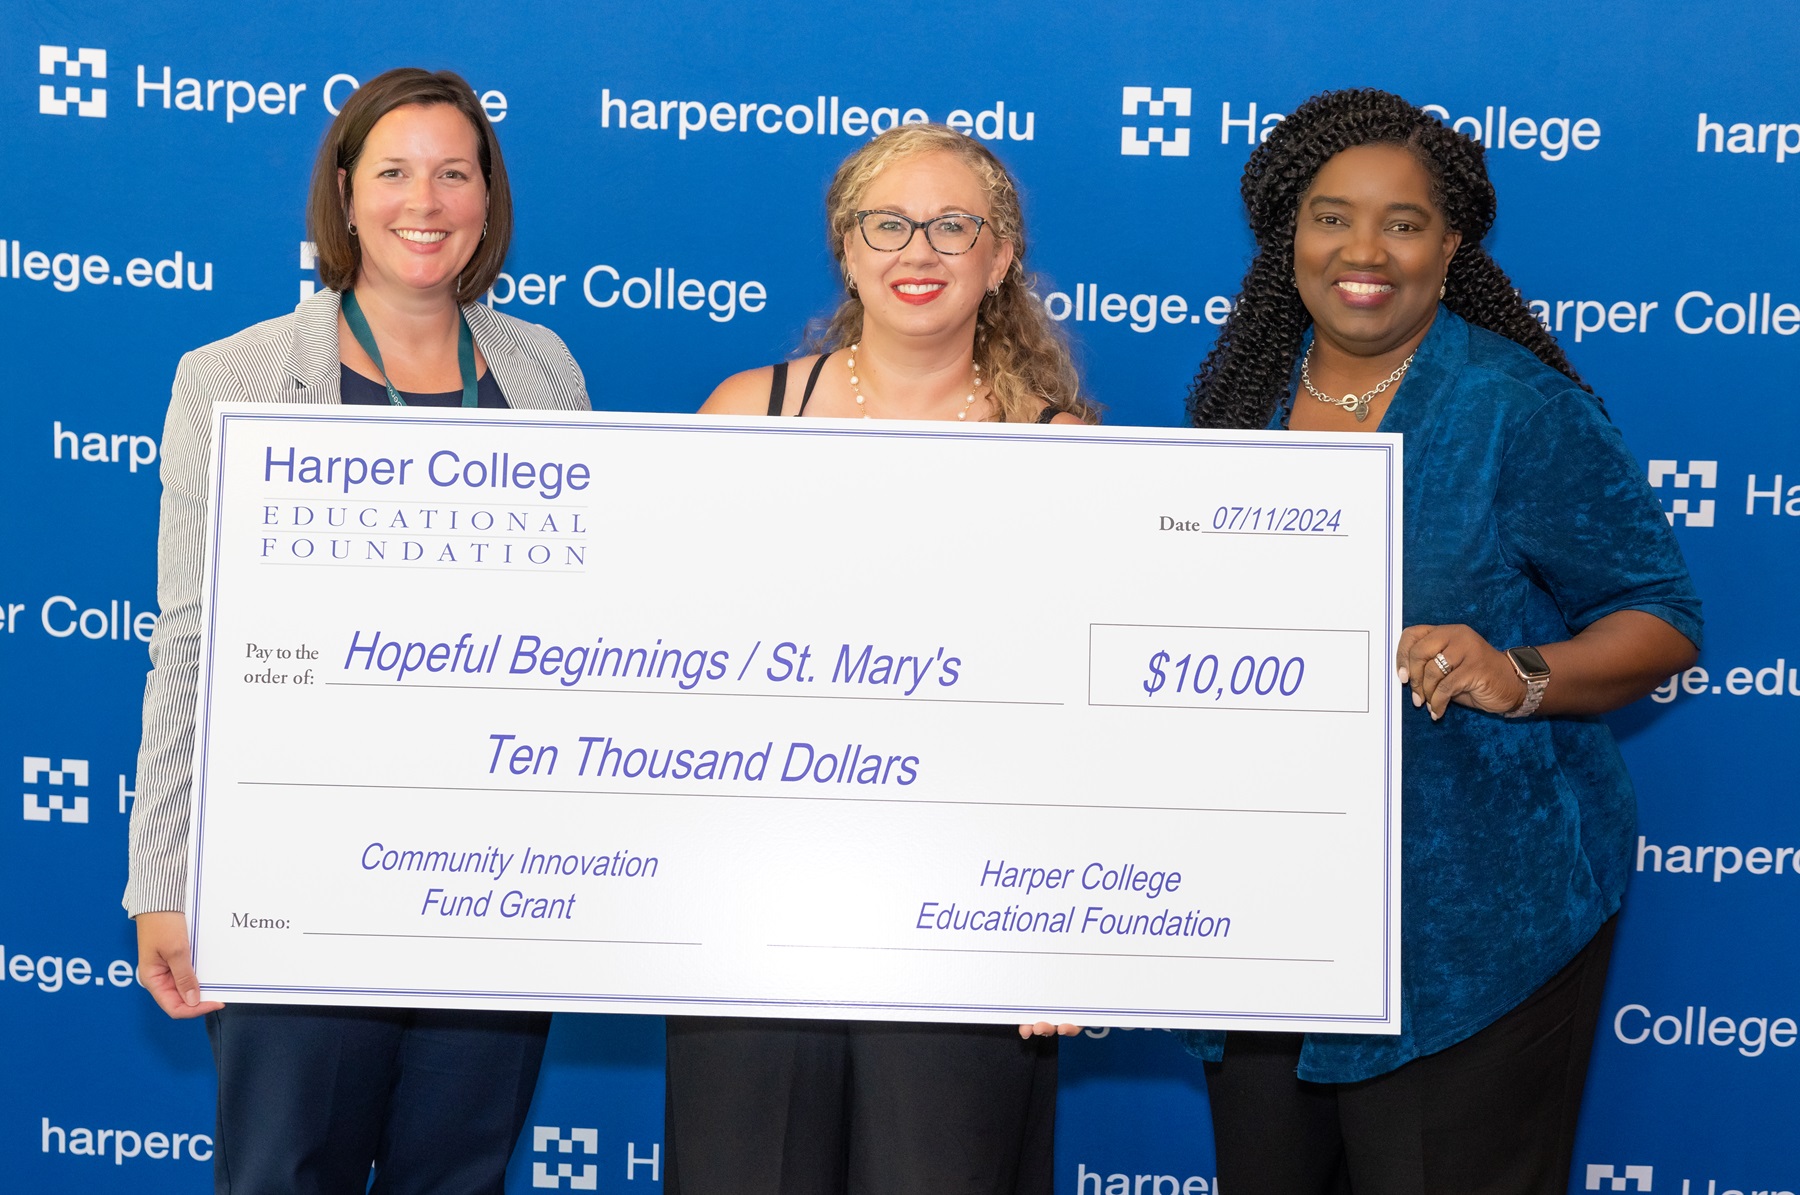 Heather Zoldak, Natalie Rodriguez and Dr. Avis Proctor stand with a commemorative check from the Harper College Educational Foundation.